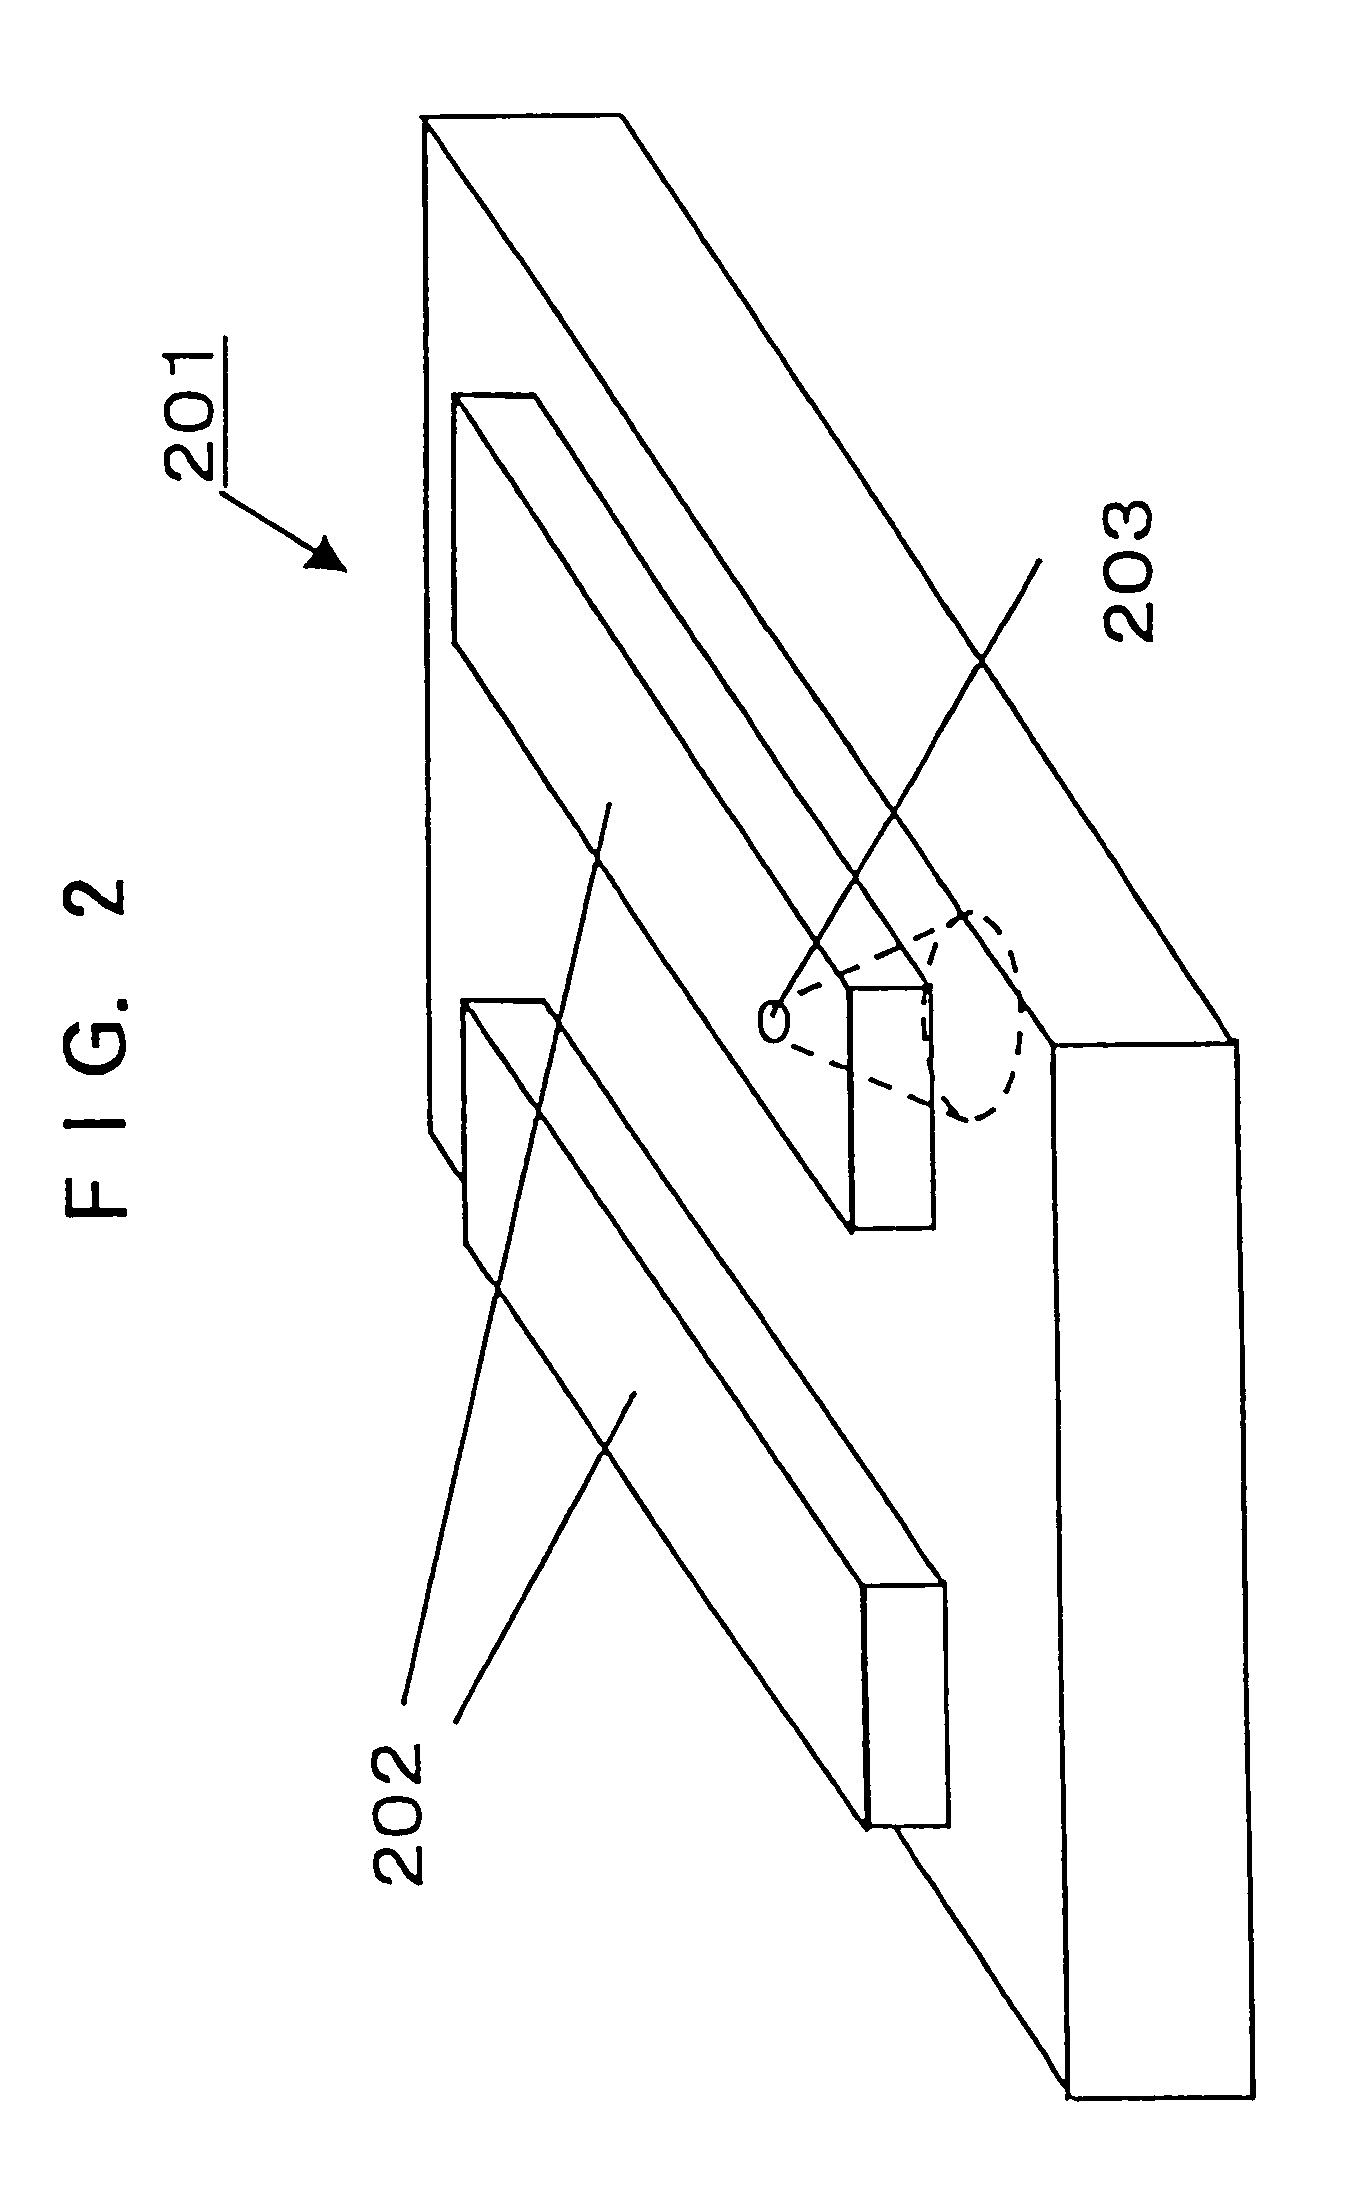 Near-field optical head having tapered hole for guiding light beam